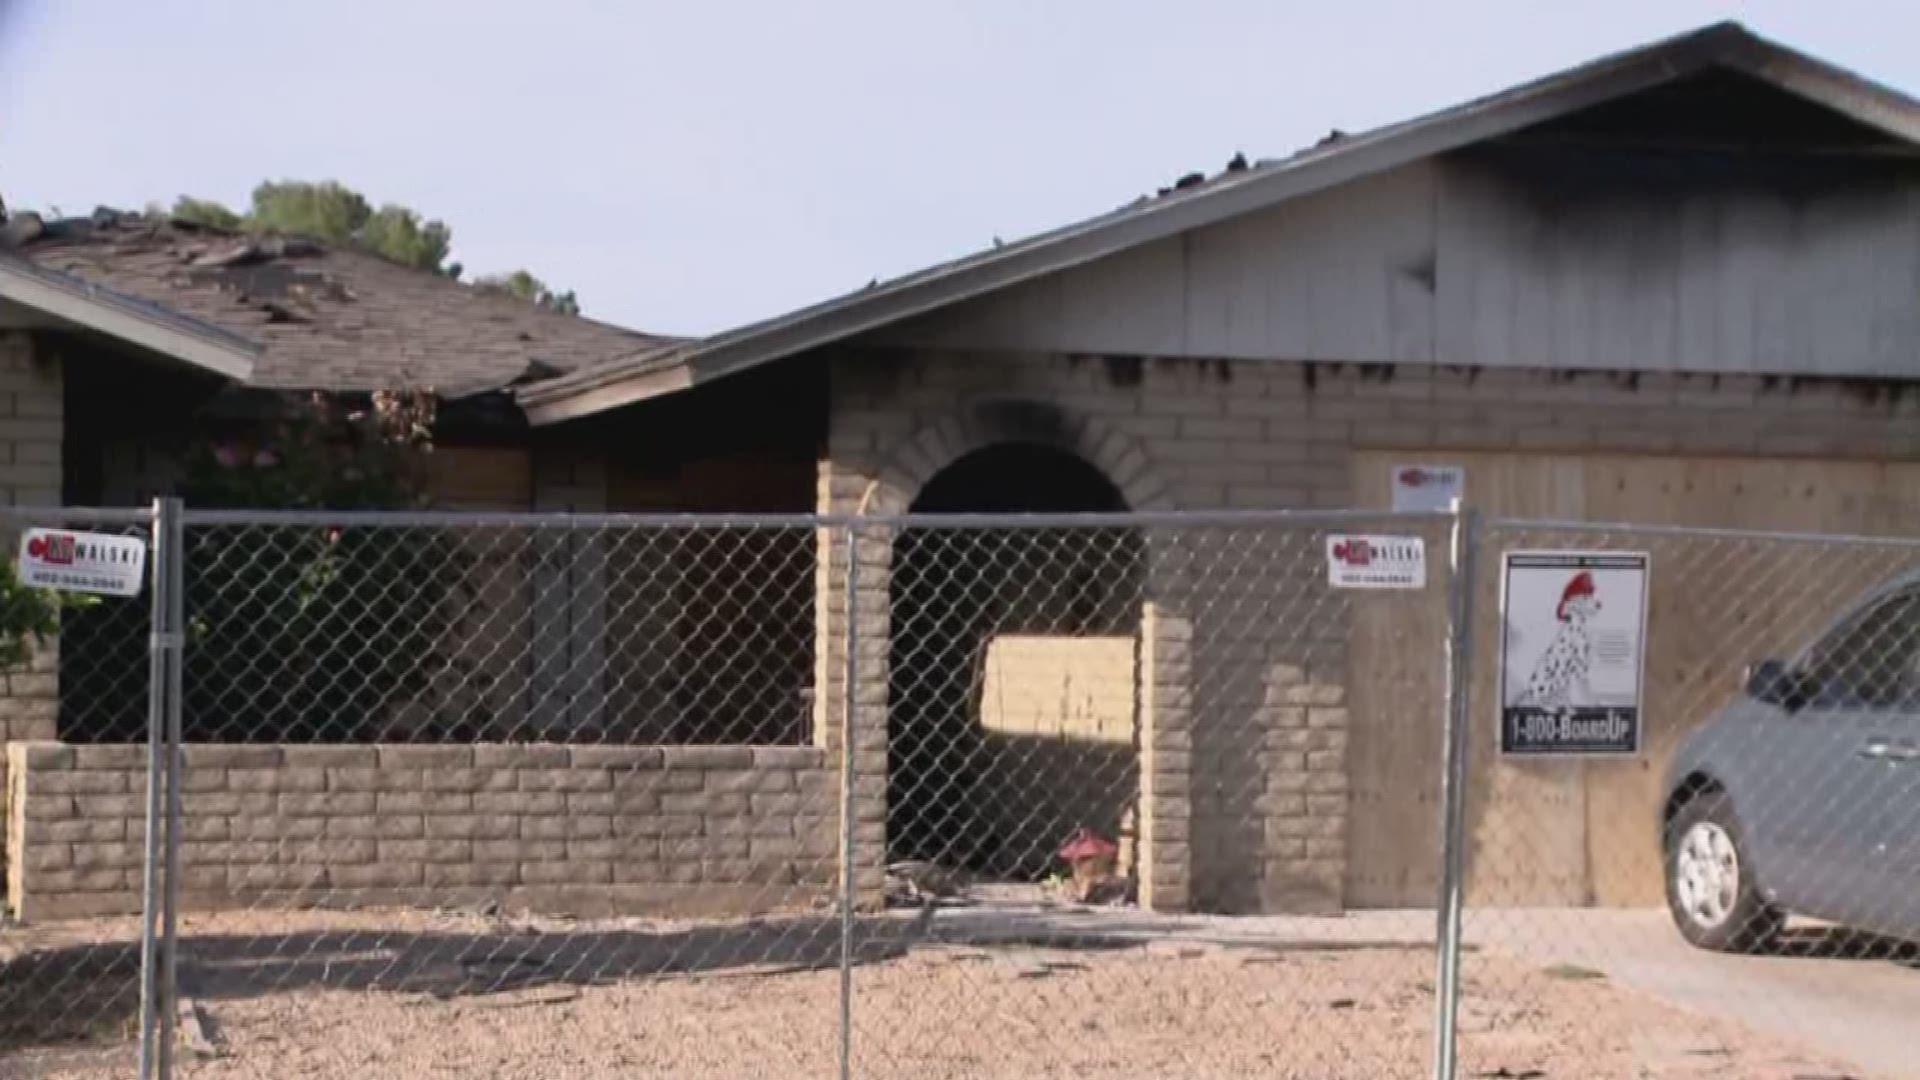 Four family members were found dead after a deadly overnight house fire near 51st and Peoria avenues.